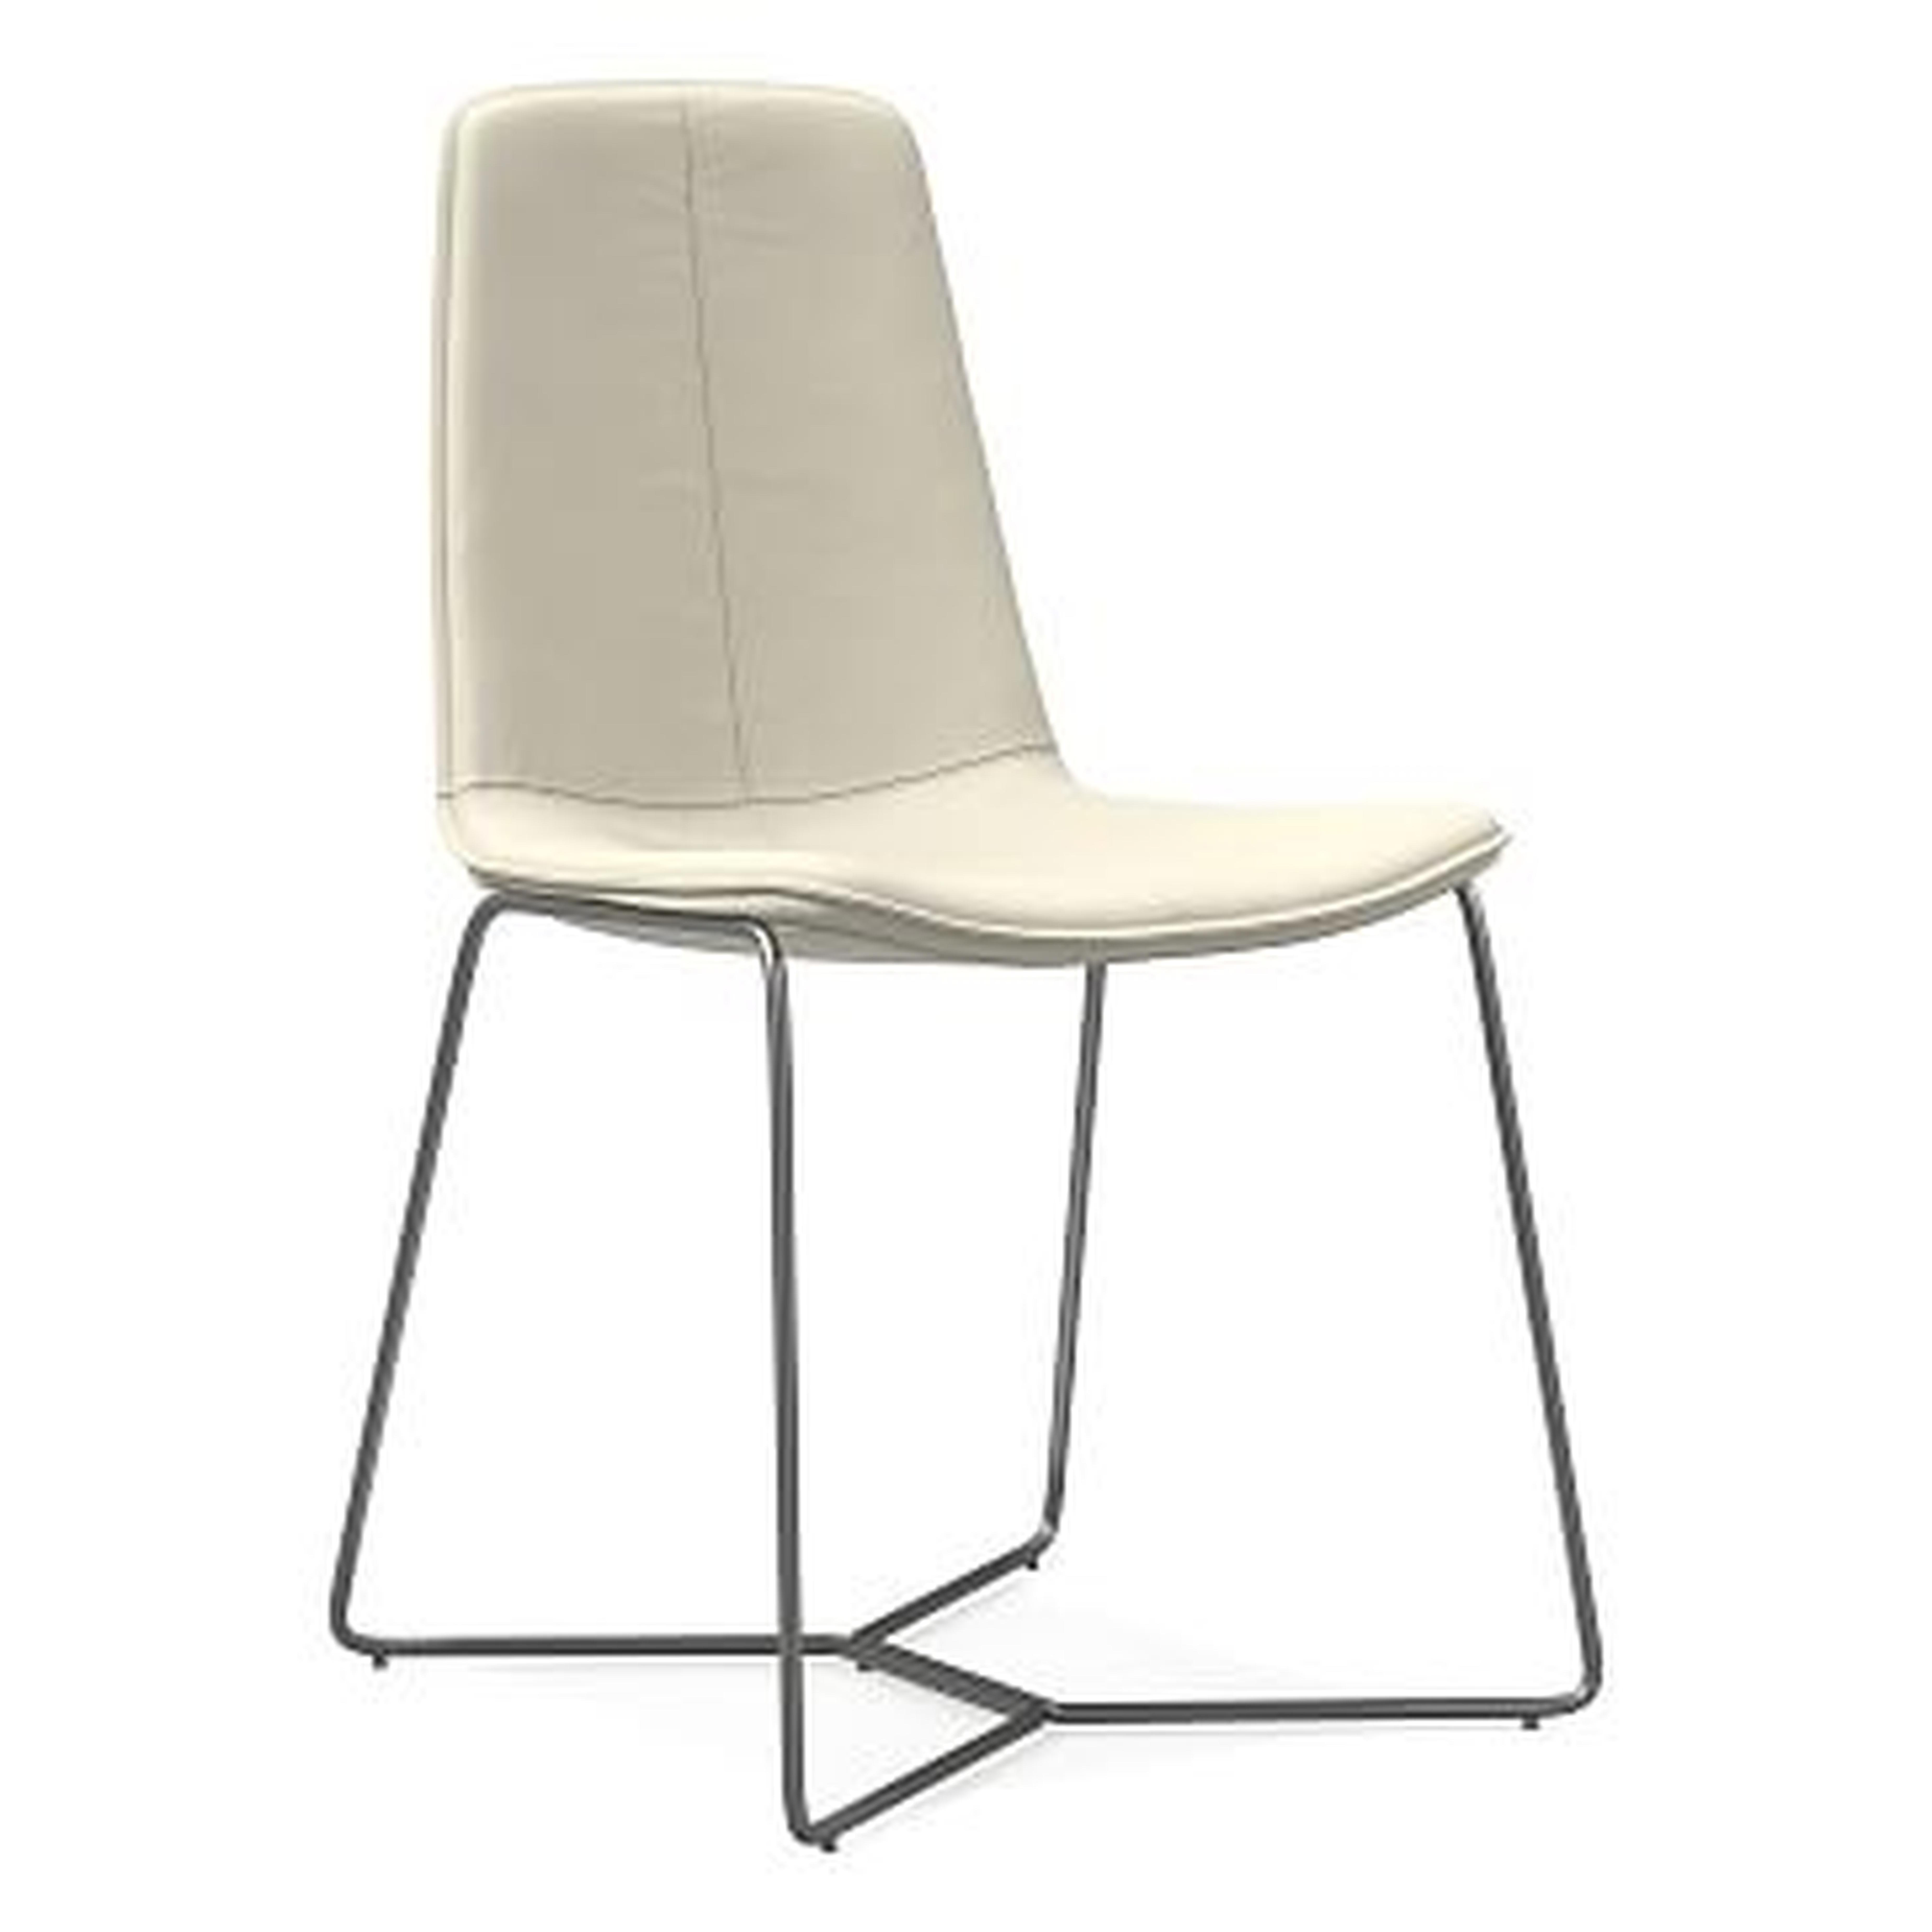 Slope Dining Chair, Vegan Leather, Snow, Charcoal - West Elm